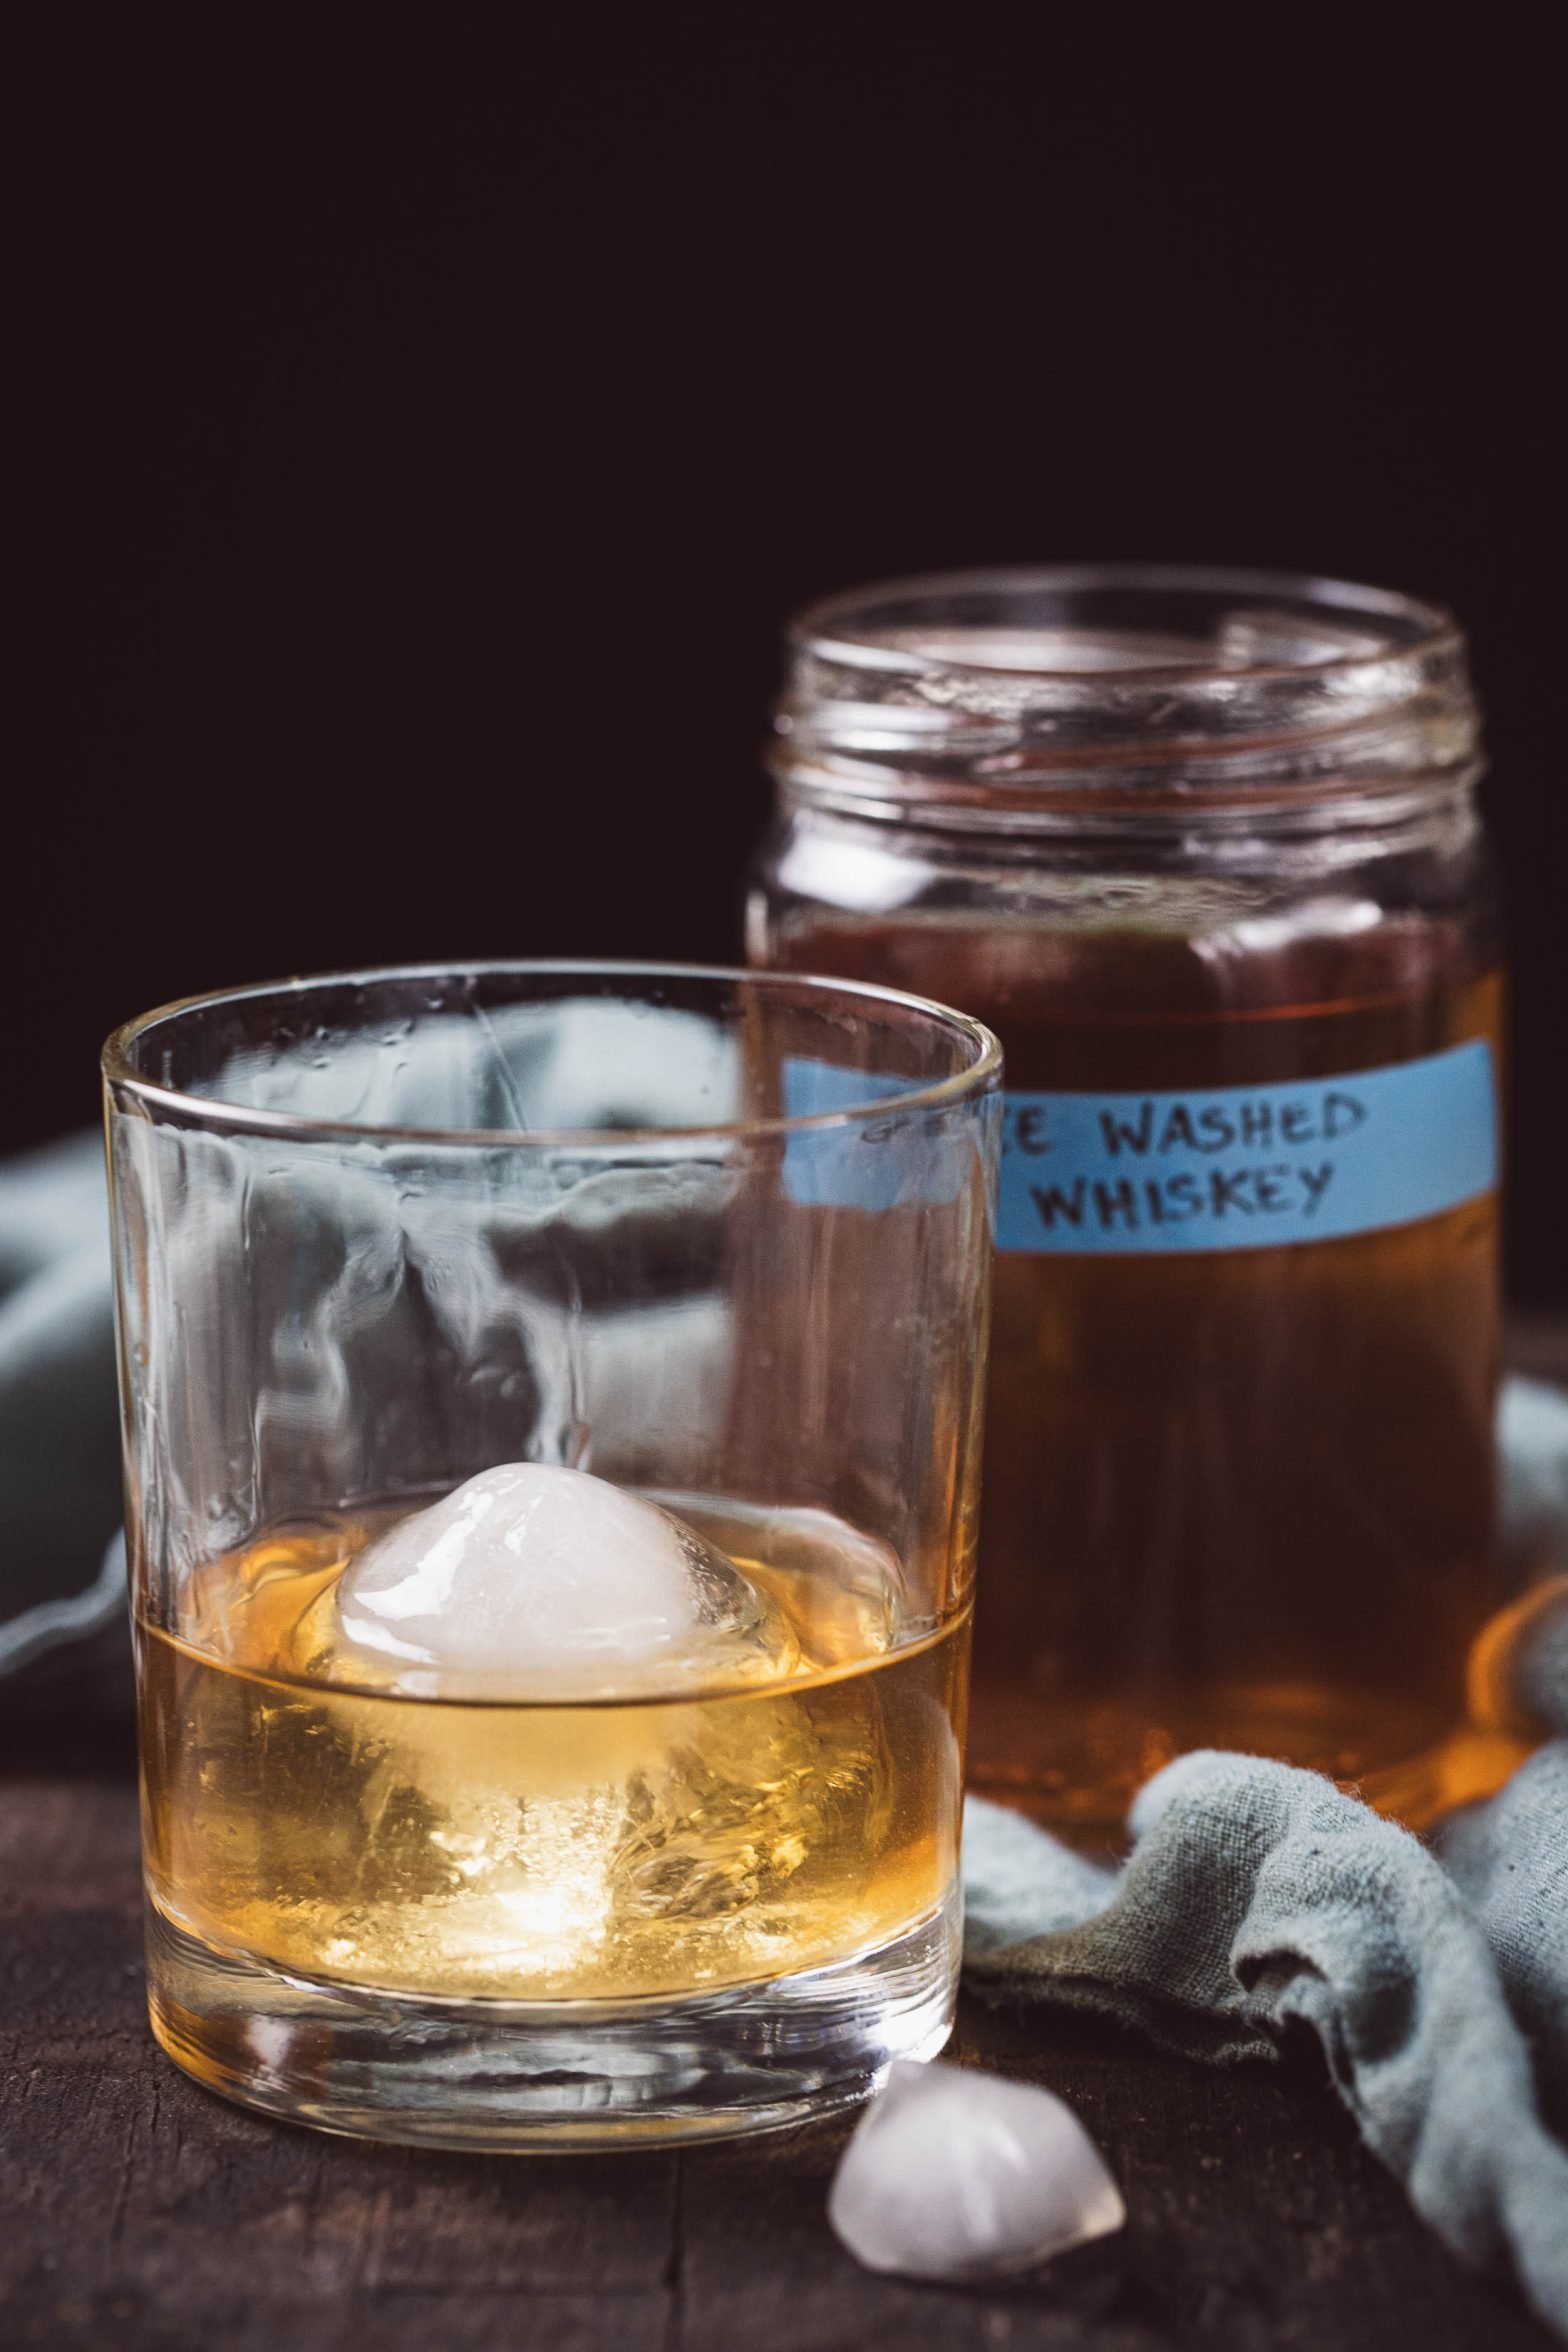 Ghee Washed Whiskey showing a glass and the jar.